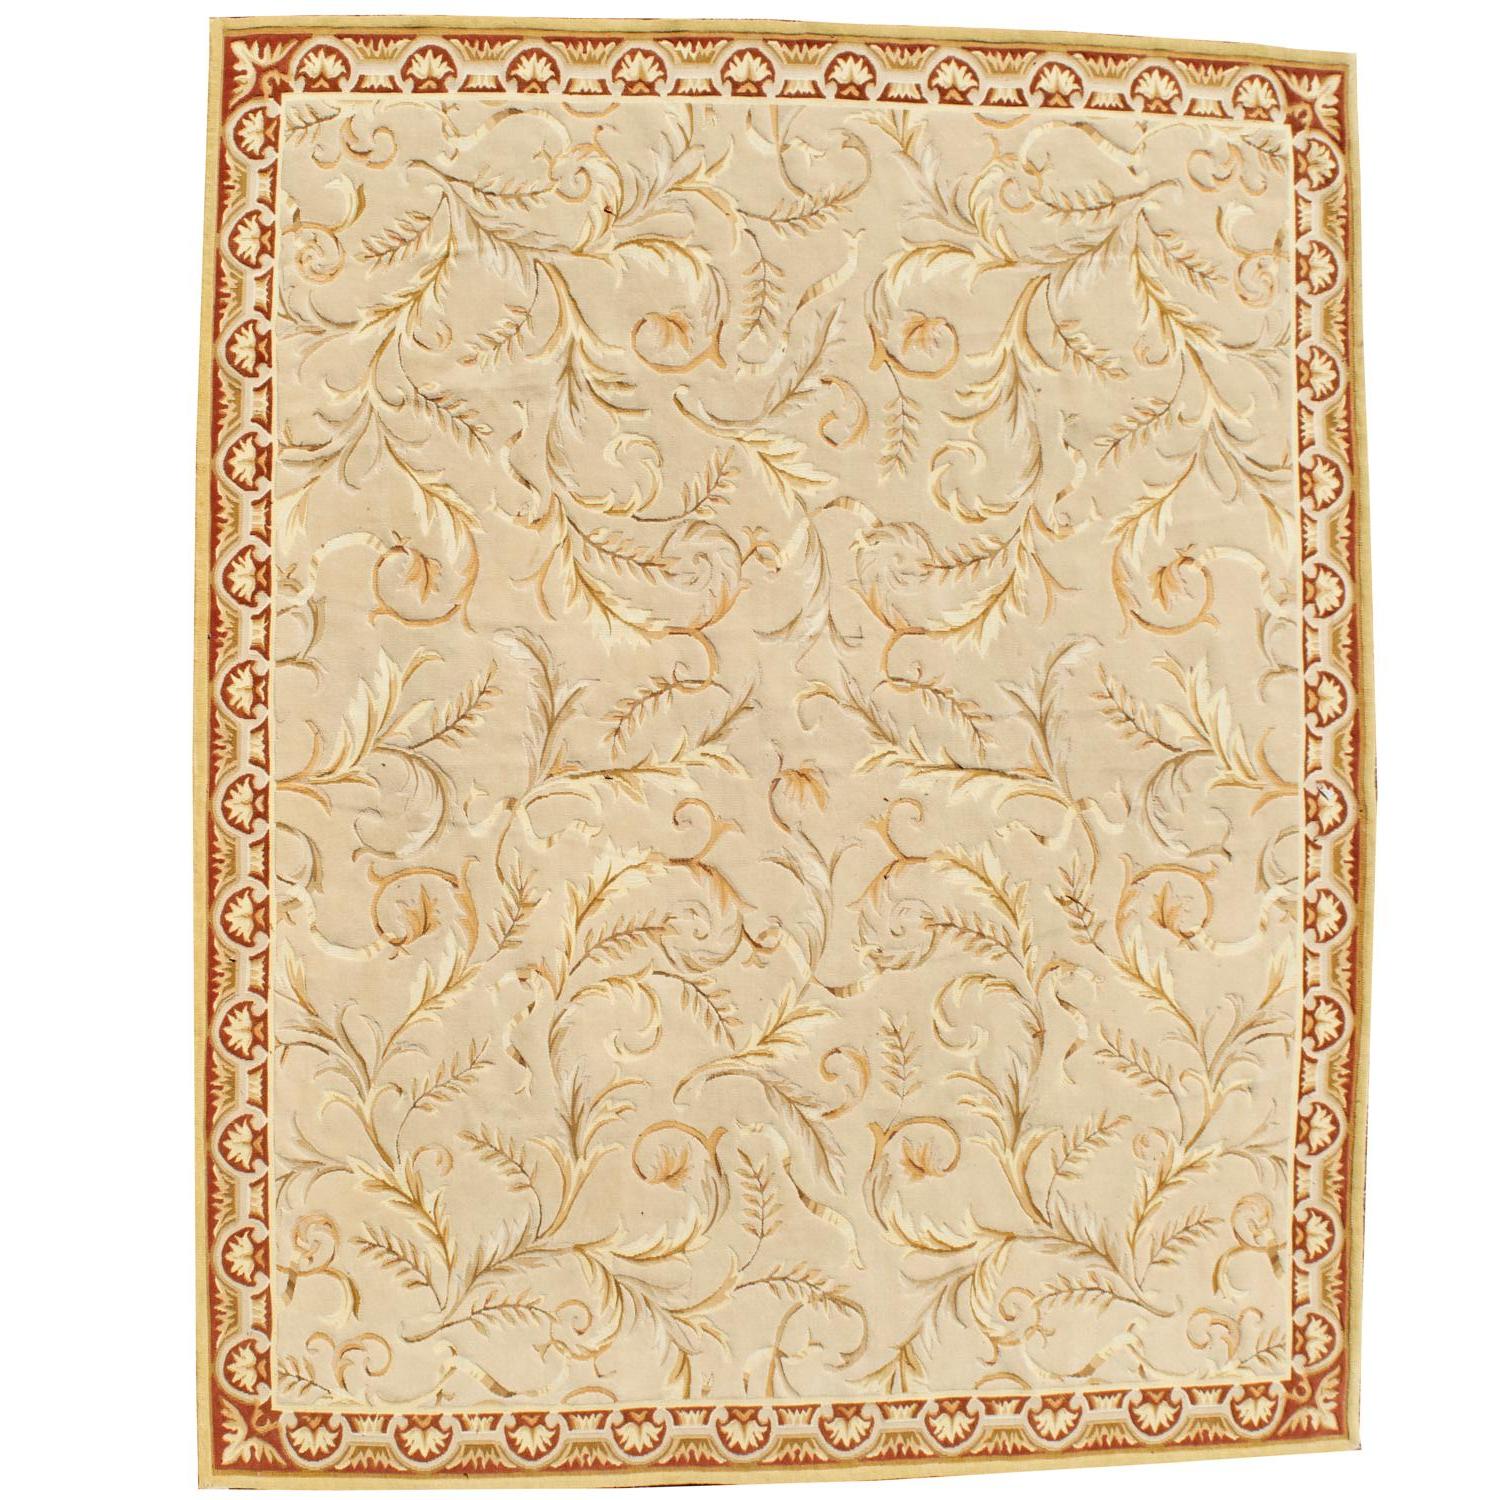 21st C. Pale French Savonnerie Style Wool Carpet with Foliate Vine Pattern For Sale 2